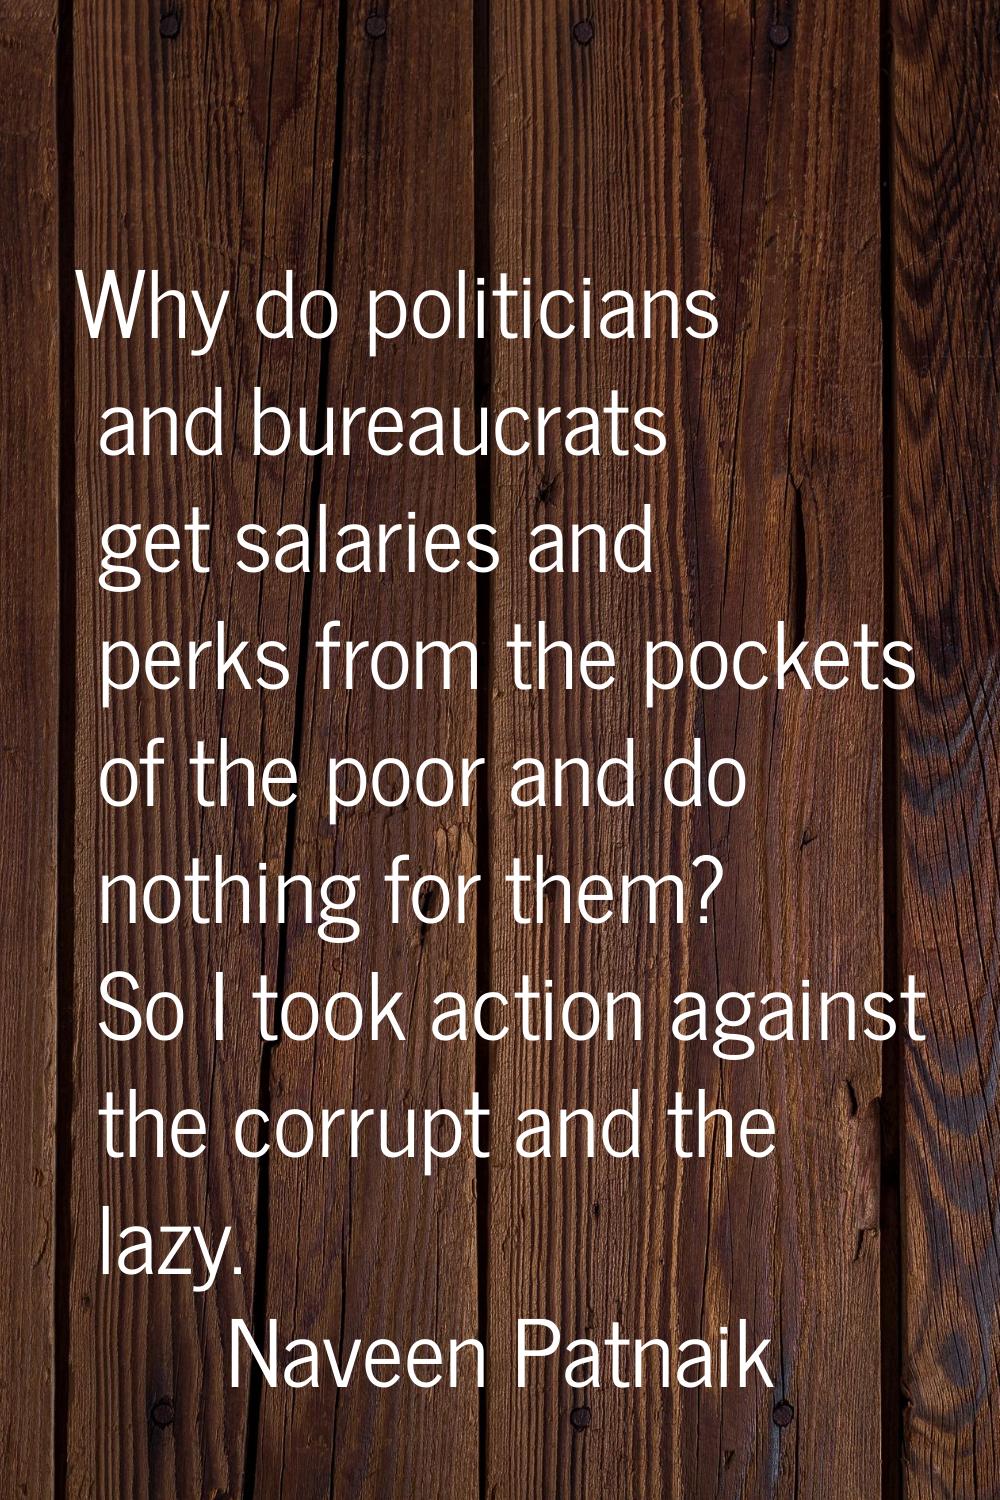 Why do politicians and bureaucrats get salaries and perks from the pockets of the poor and do nothi